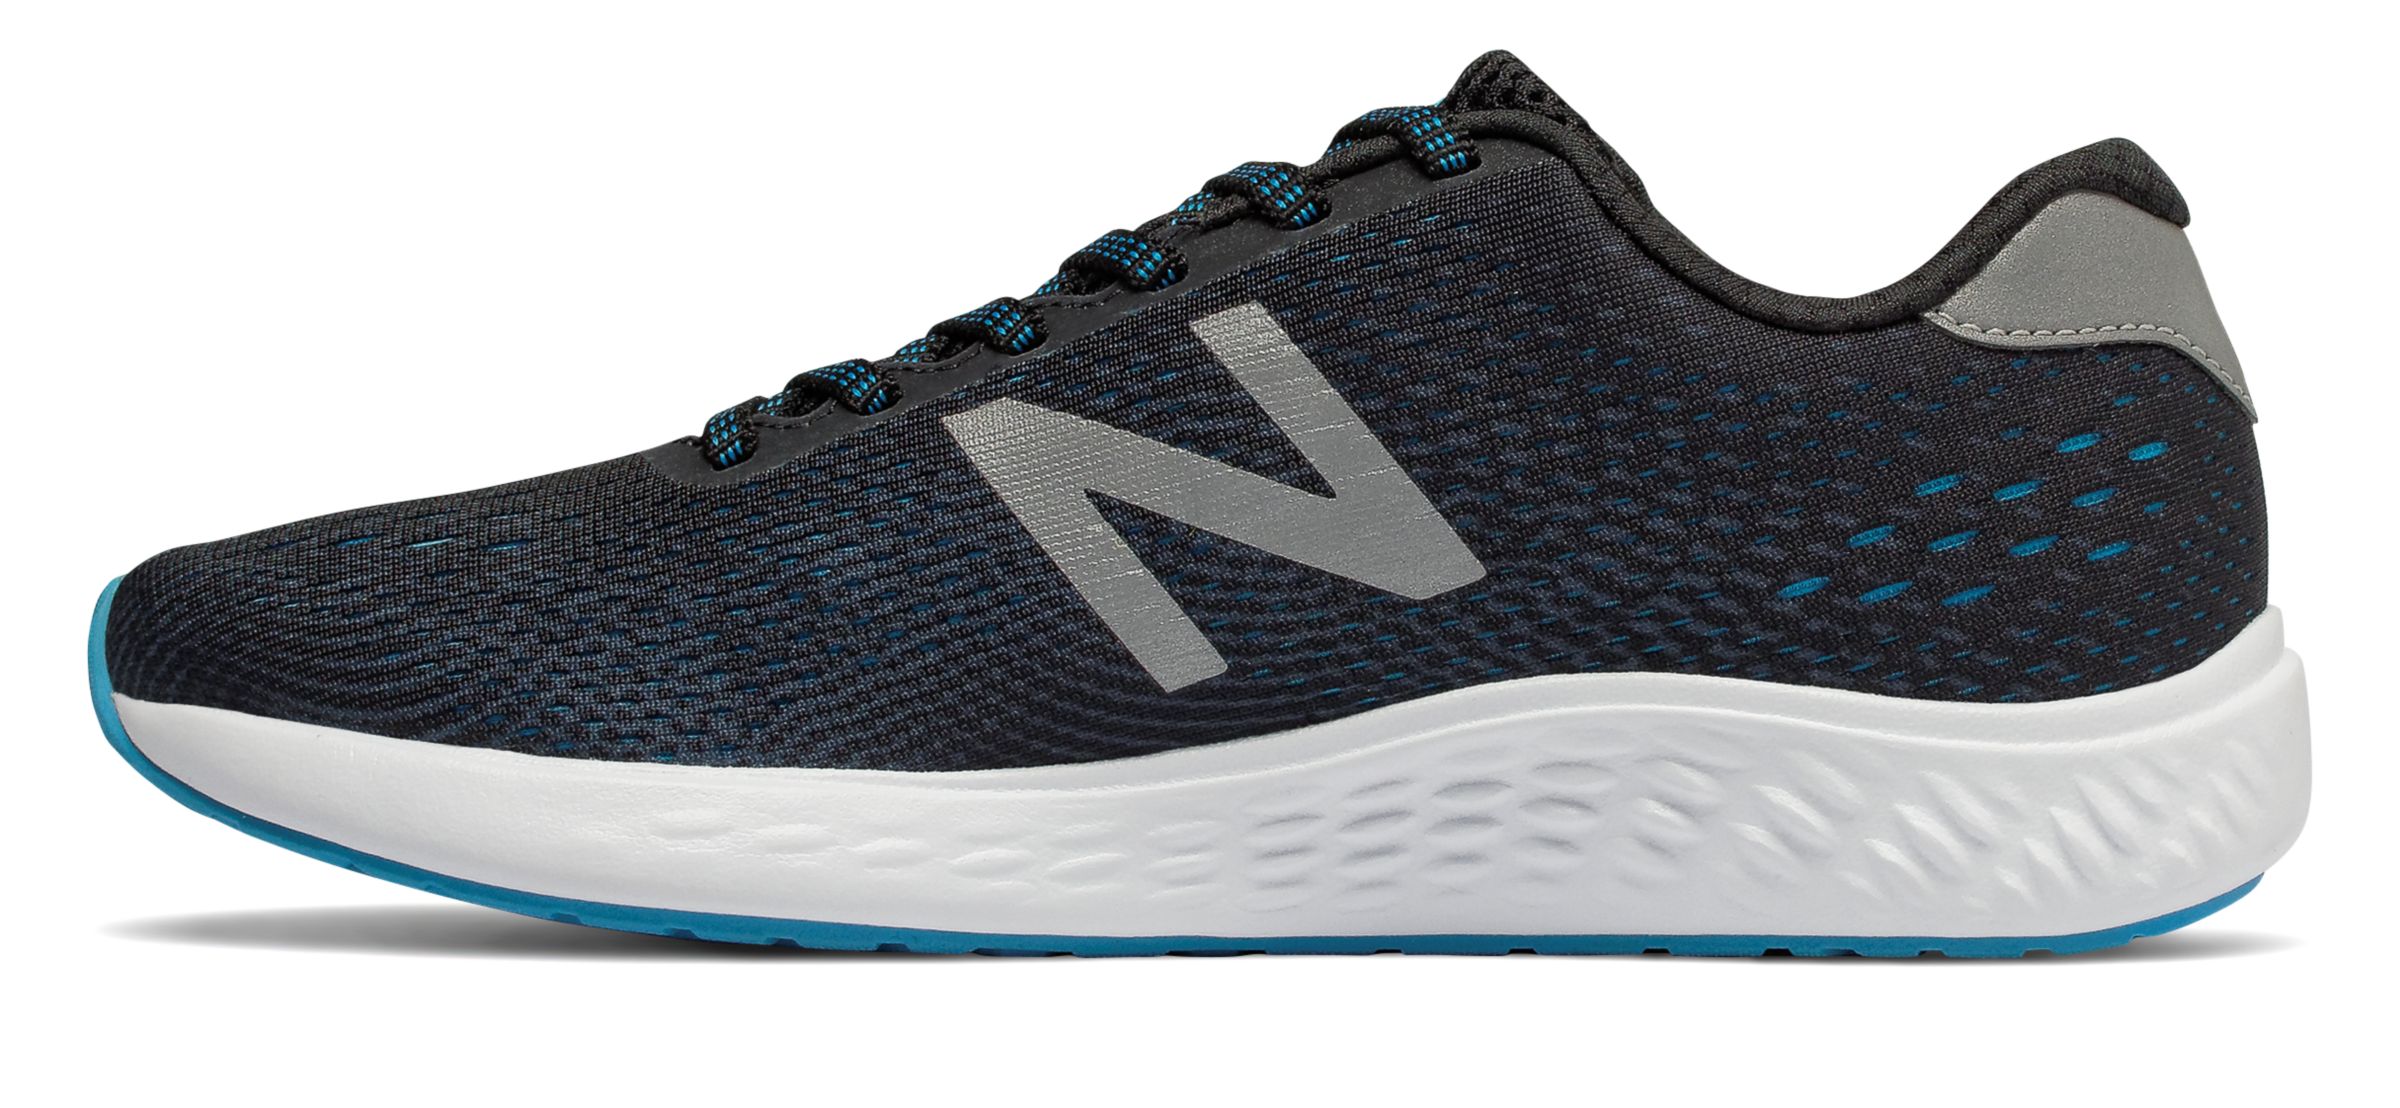 New Balance WARNX-V1 on Sale - Discounts Up to 63% Off on WARNXLP1 at Joe's  New Balance Outlet